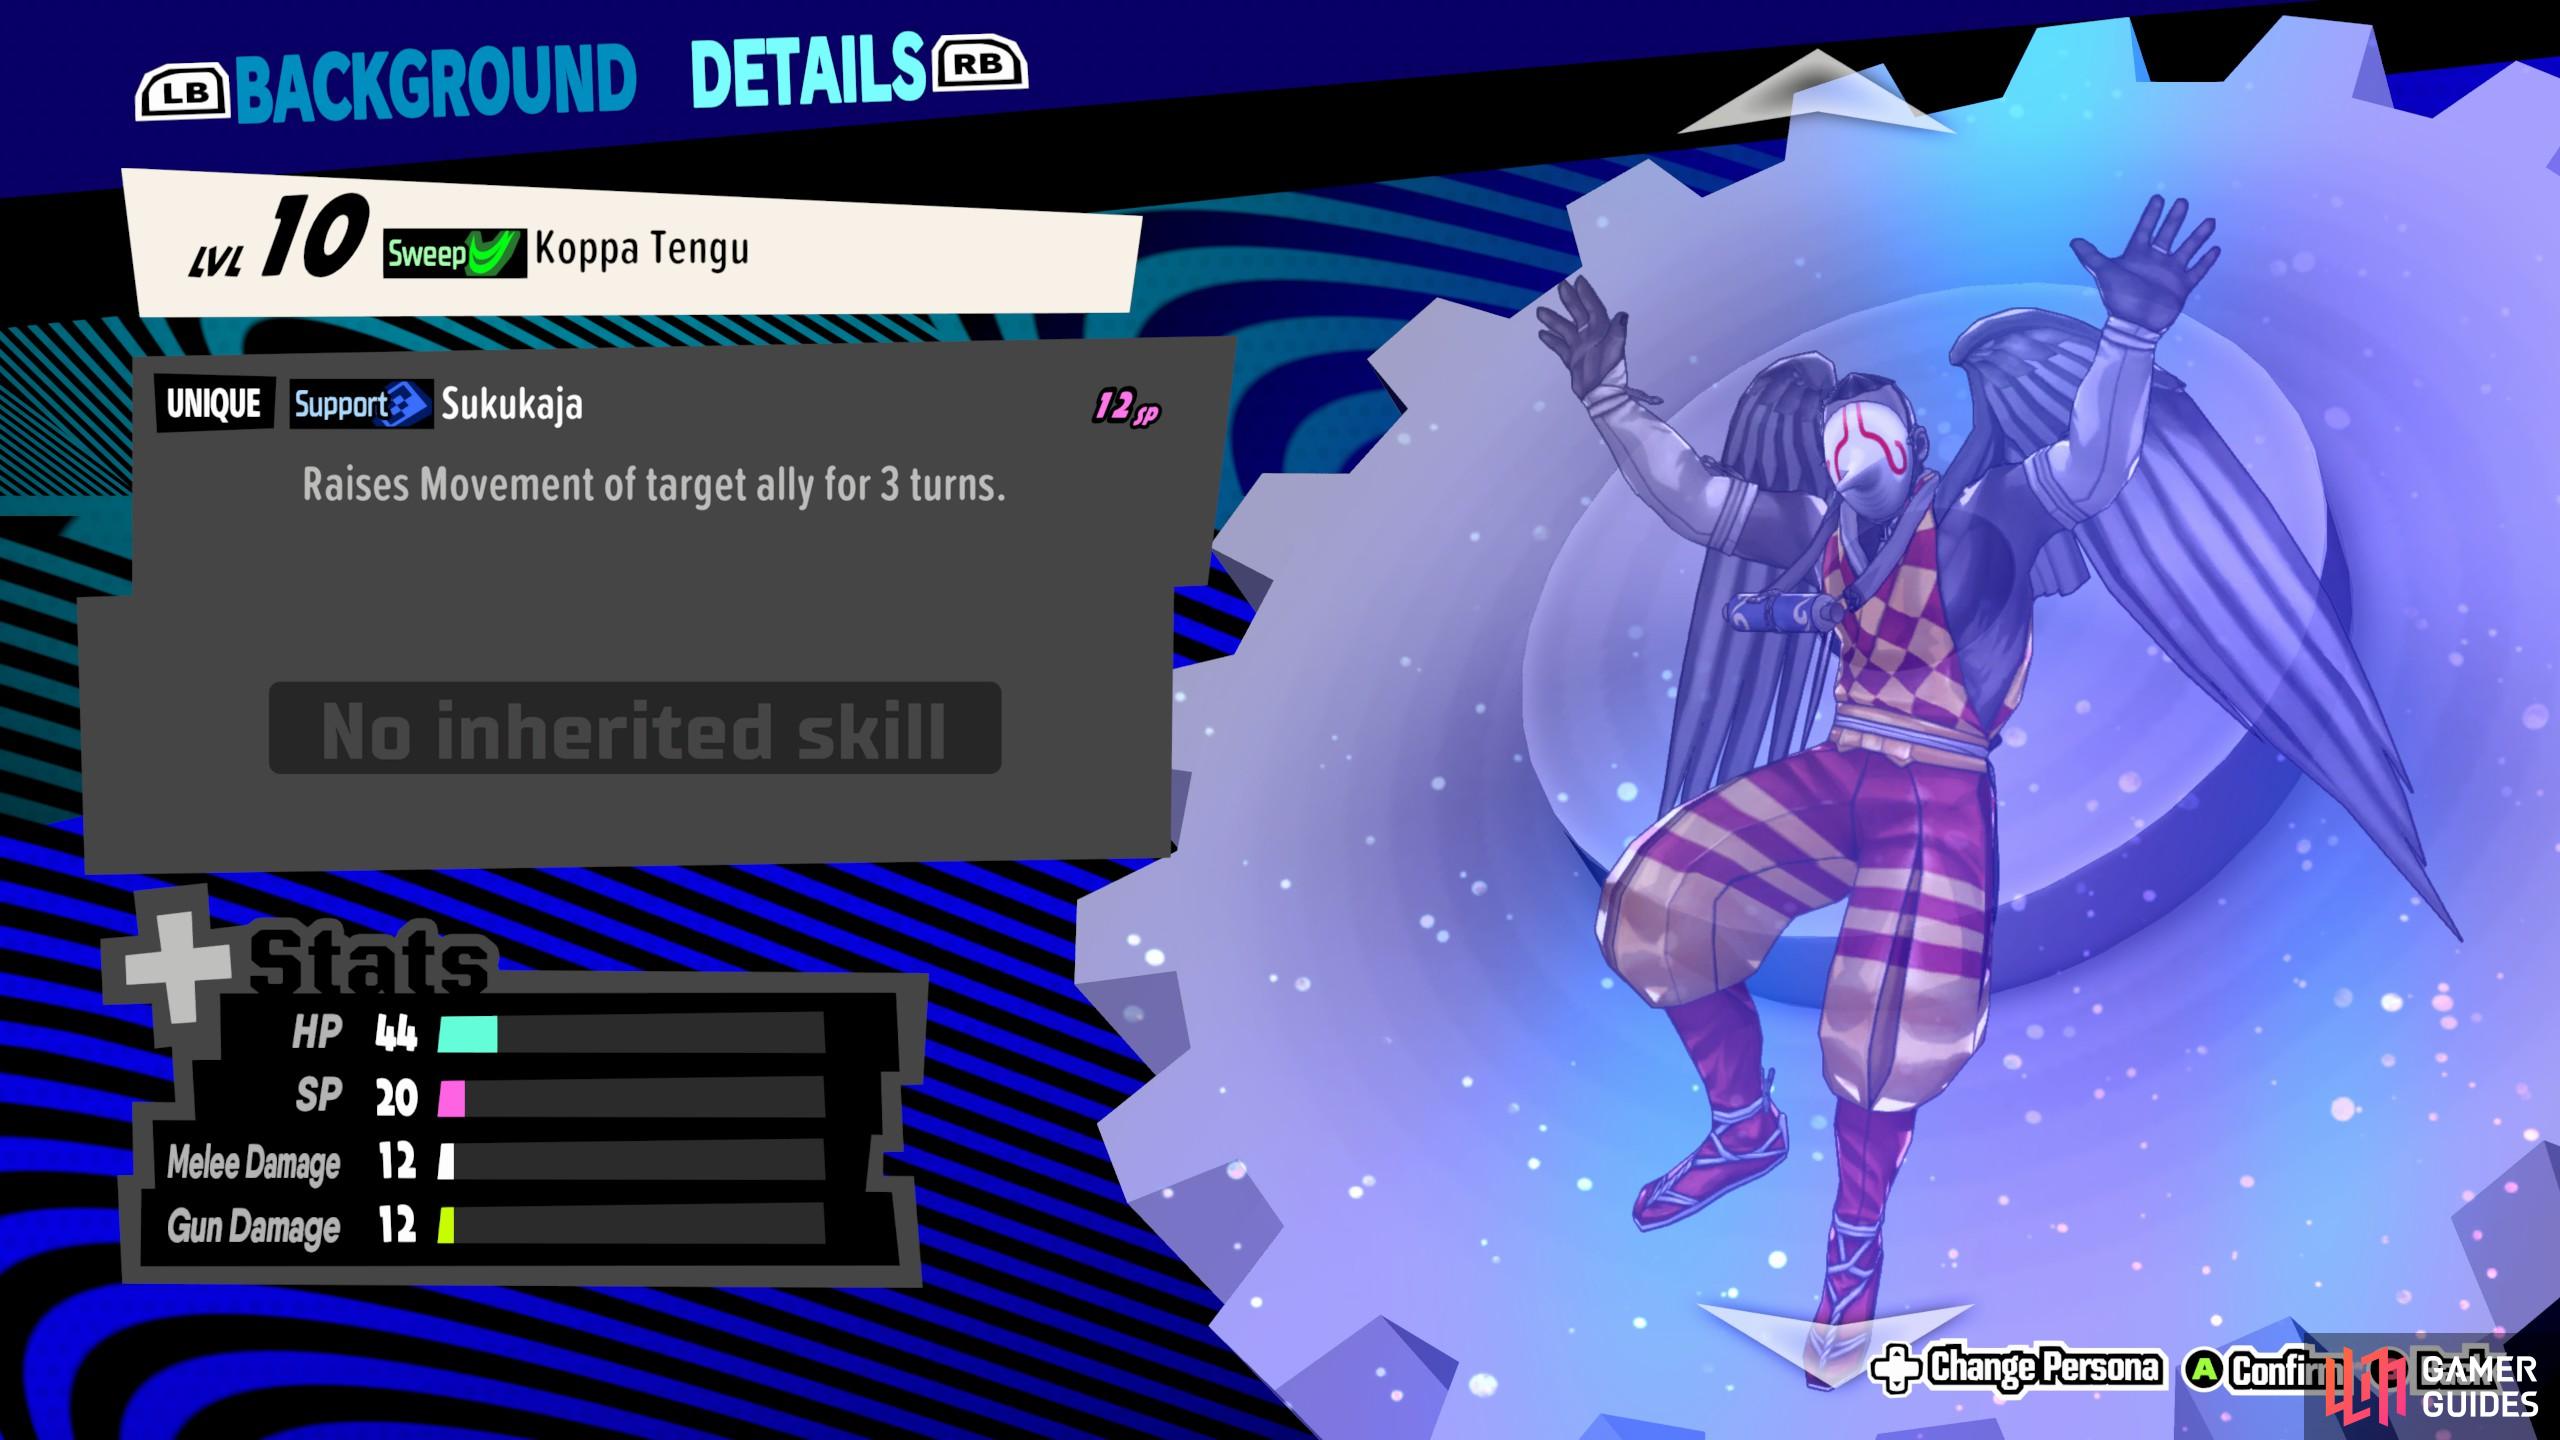 To cast Sukukaja buff you'll need to find a persona who has access to the skill.